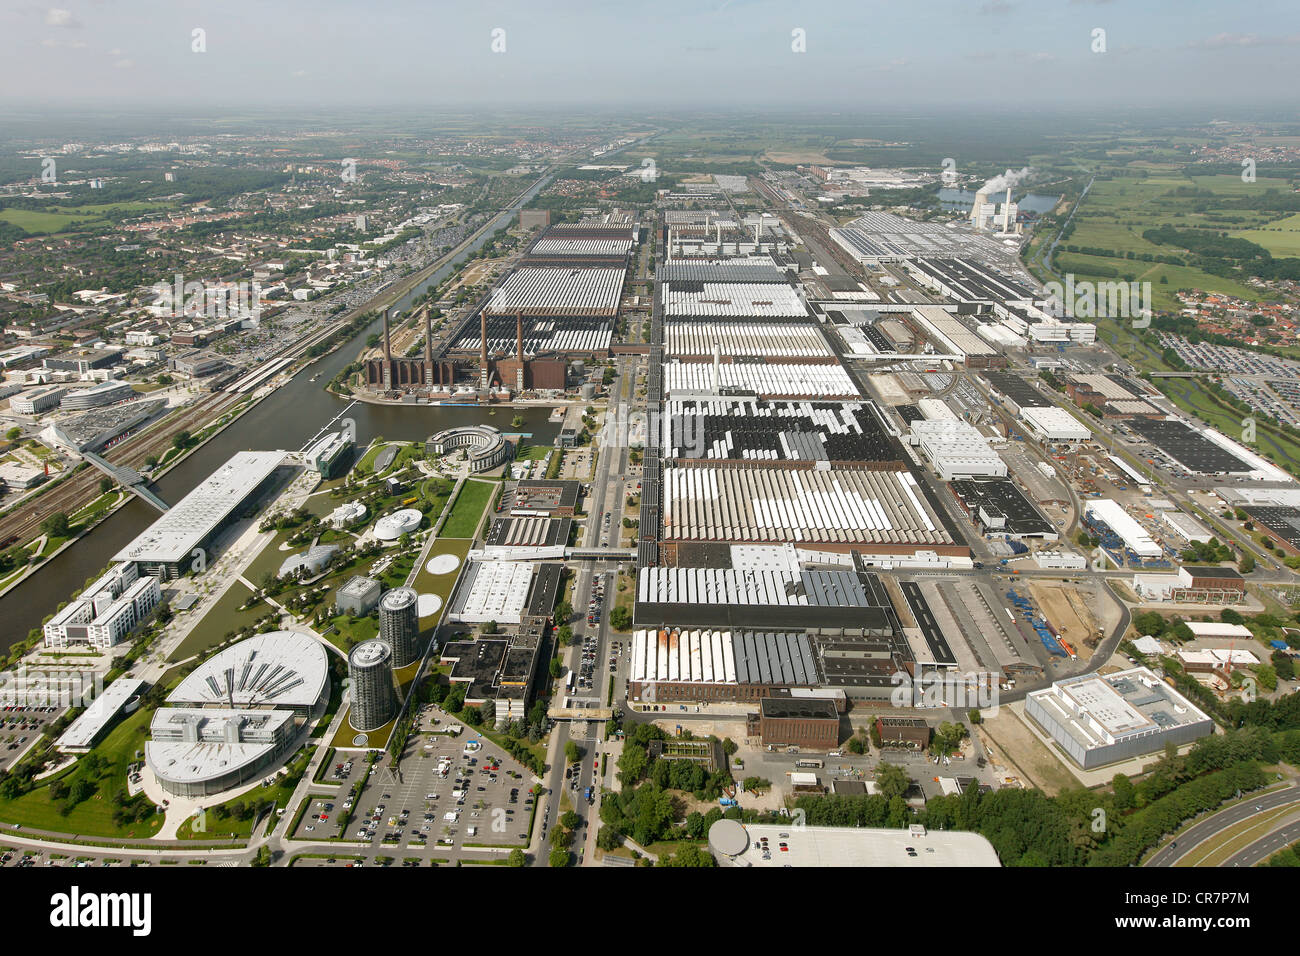 Aerial view, Volkswagen plant, VW factory, Autostadt visitor attraction, Wolfsburg, Lower Saxony, Germany, Europe Stock Photo